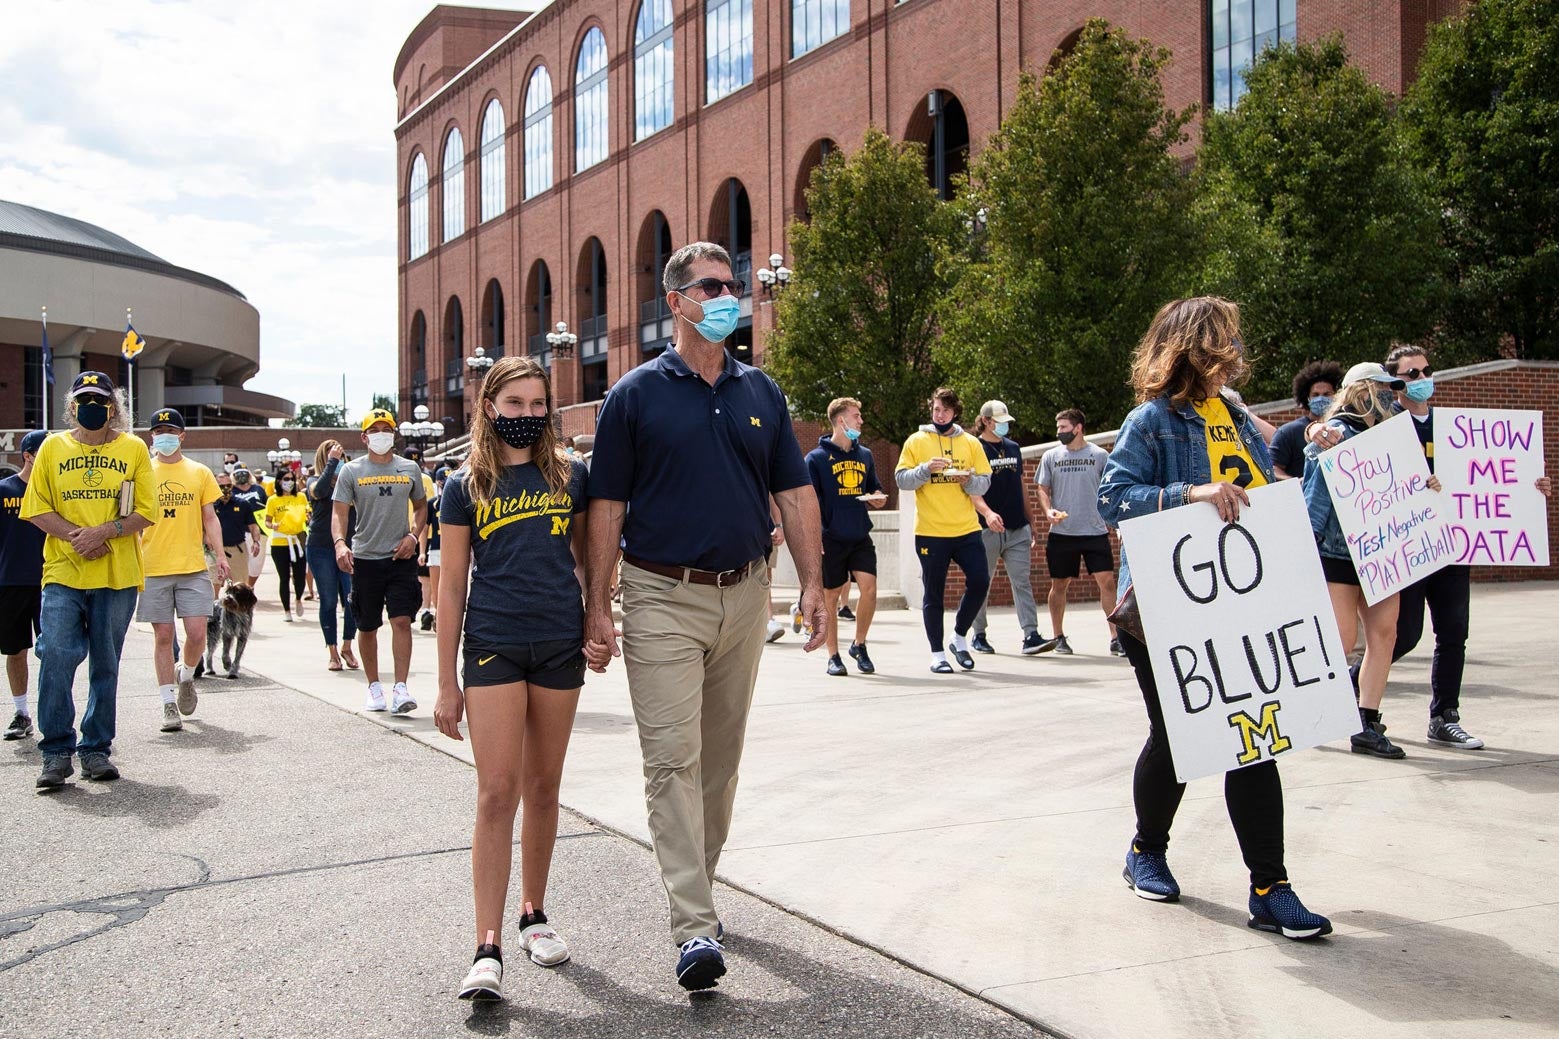 Harbaugh and a small crowd of individuals, all wearing protective masks and holding signs, walk in front of the University of Michigan's football stadium.